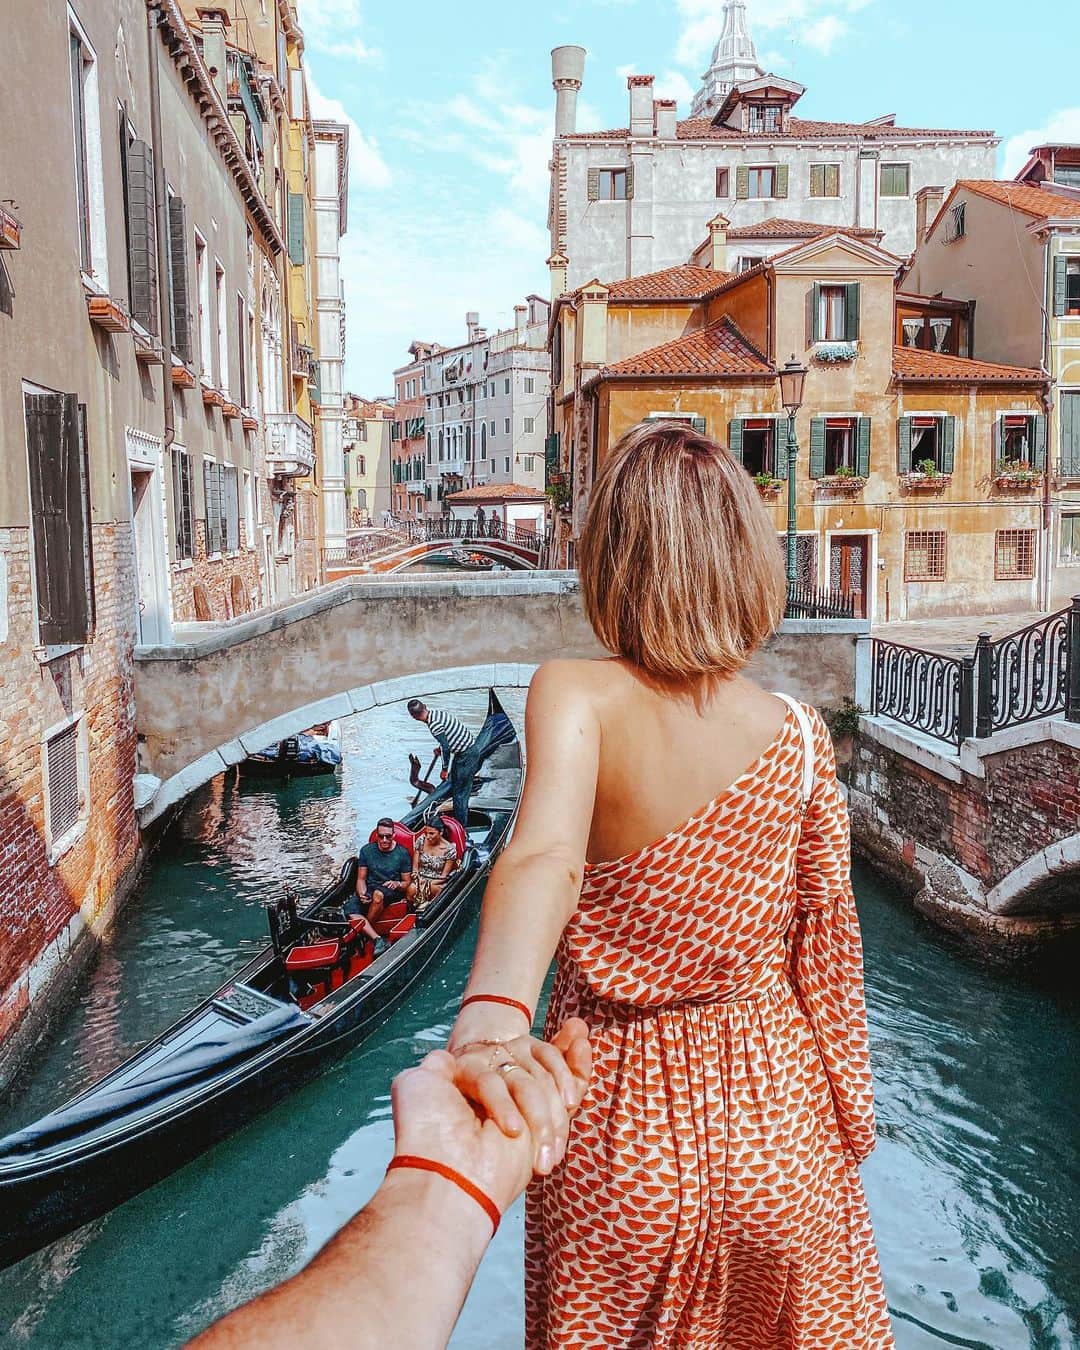 Murad Osmannのインスタグラム：「#Followmeto Venice.  Gondolas were once regularly used by Venetians, especially of the upper classes, today vaporetti have become the main form of water transportation in Venice. A few hundred years ago there were about 10,000 gondolas plying the canals and lagoon but today, there are only about 400.  They rank among one of the most dreamed-about experiences for travelers. Wouldn’t you just love to take a ride 🙃??  #gondola #veniceitaly」